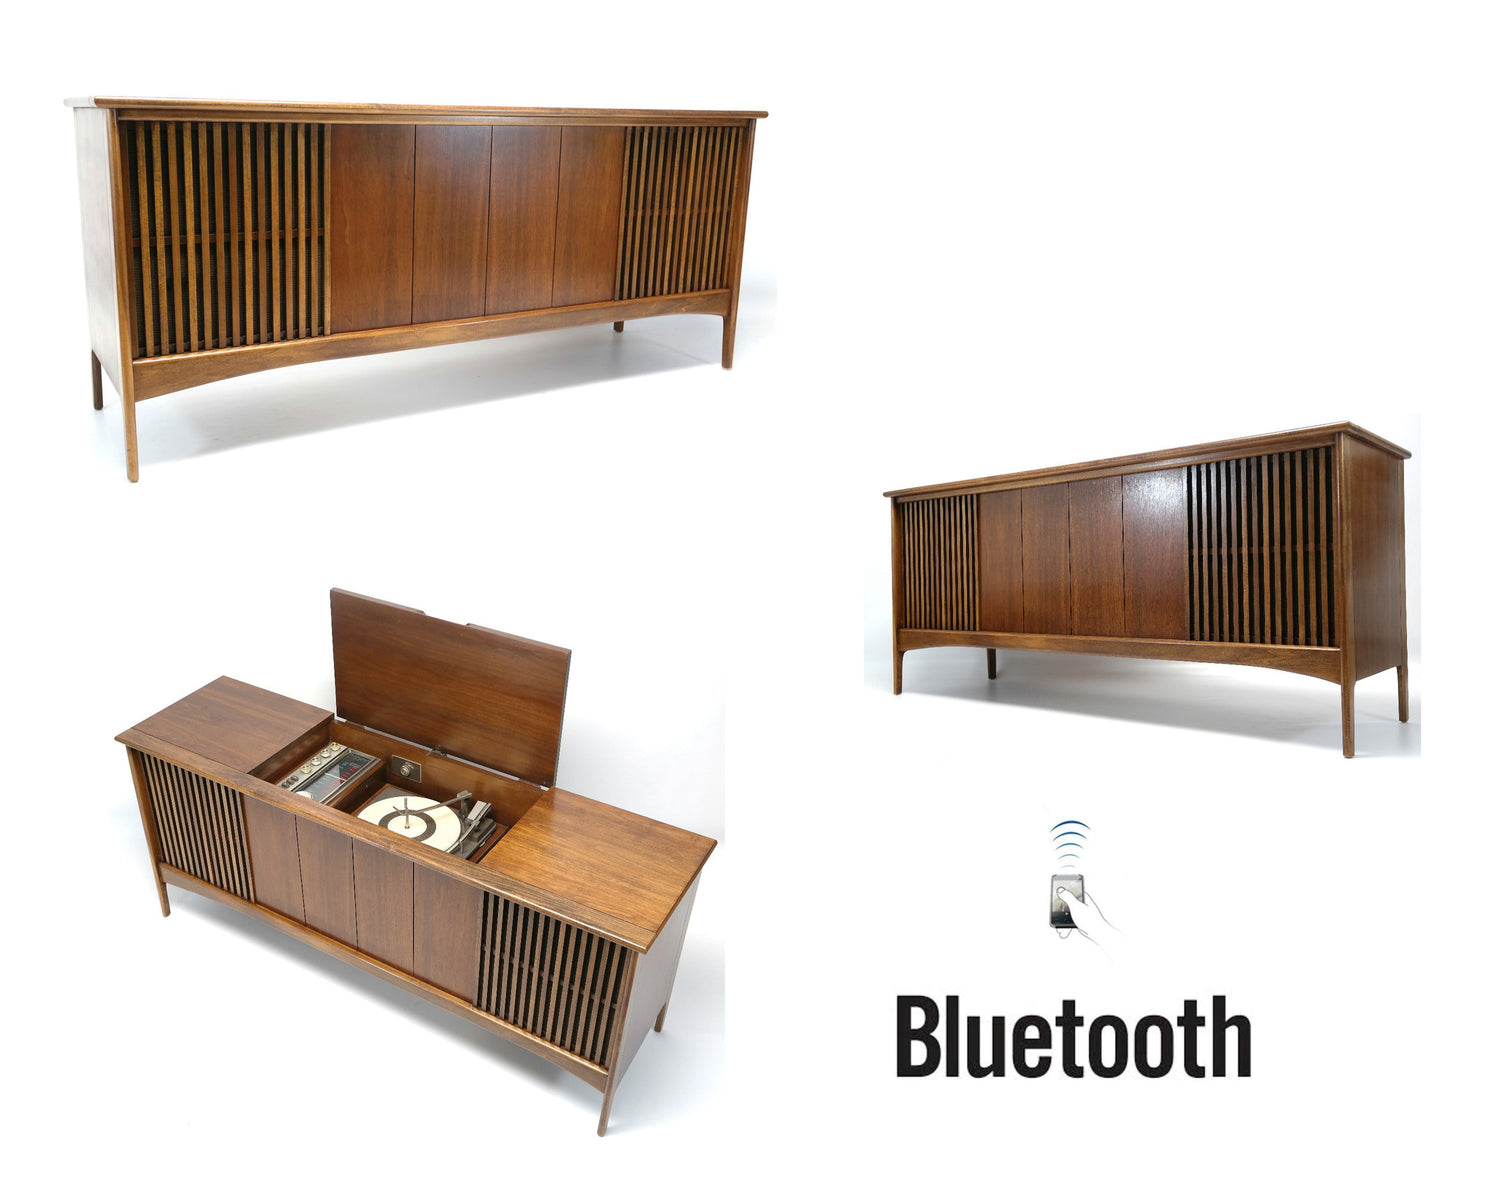 Mid Century 60's Admiral Stereo Console Record Player - Bluetooth iPod iPhone Android Input AM/FM Tuner The Vintedge Co.